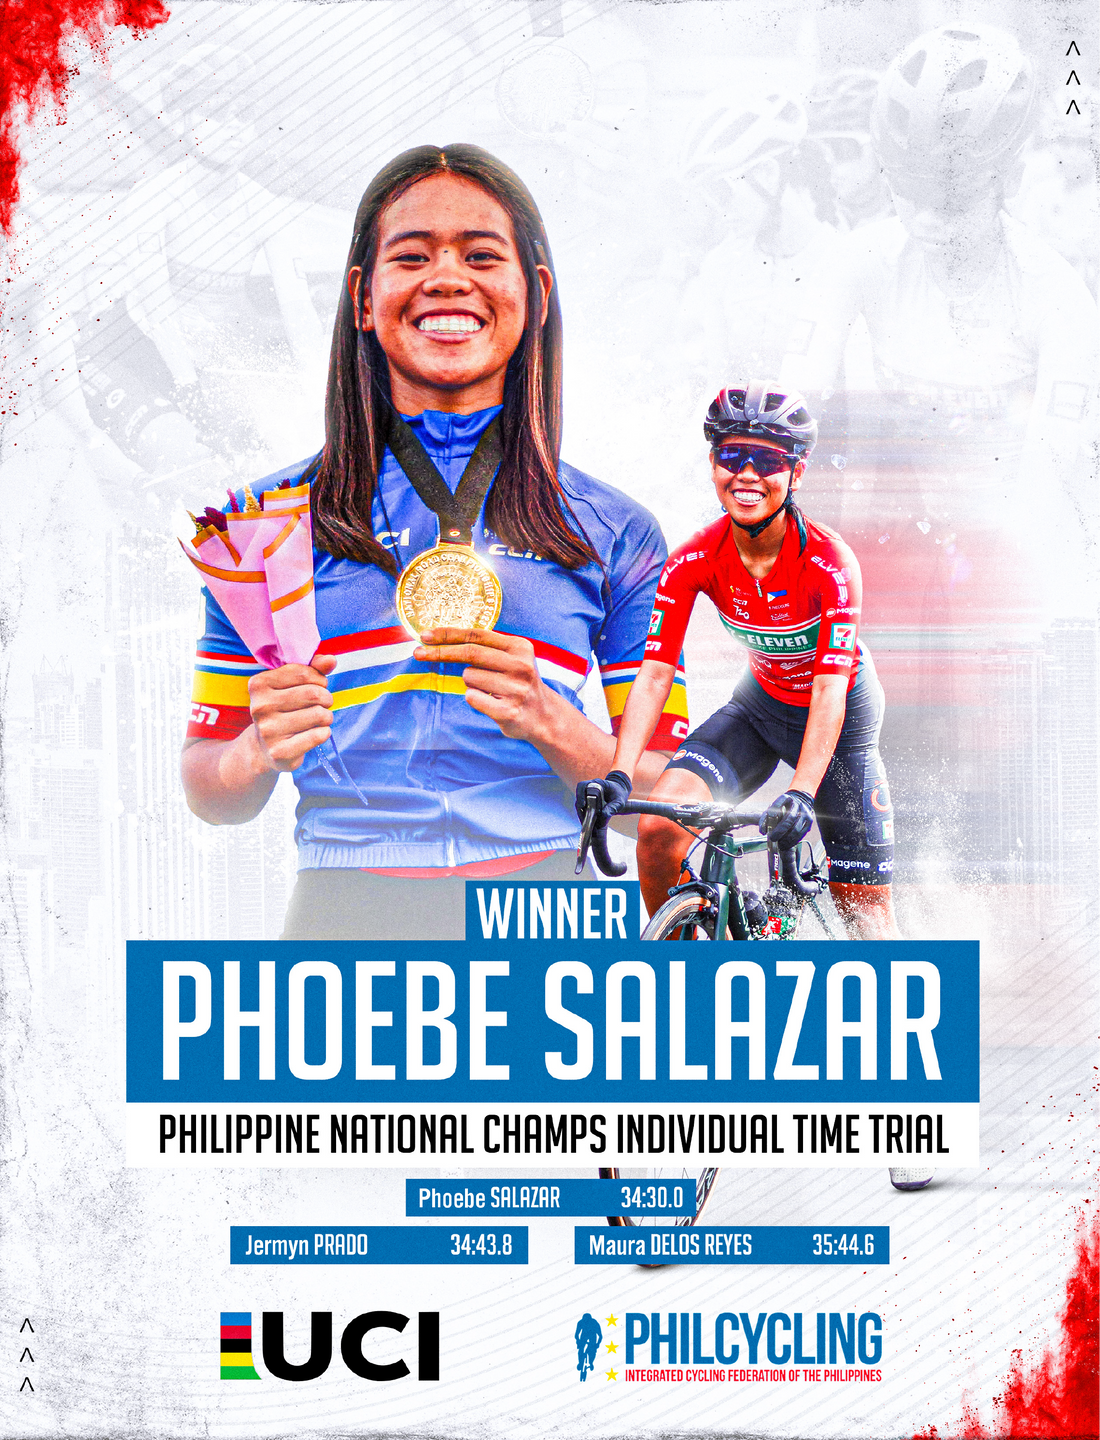 Phoebe Salazar Shines Bright: A Triumph at the Philippine National Champs Individual Time Trial